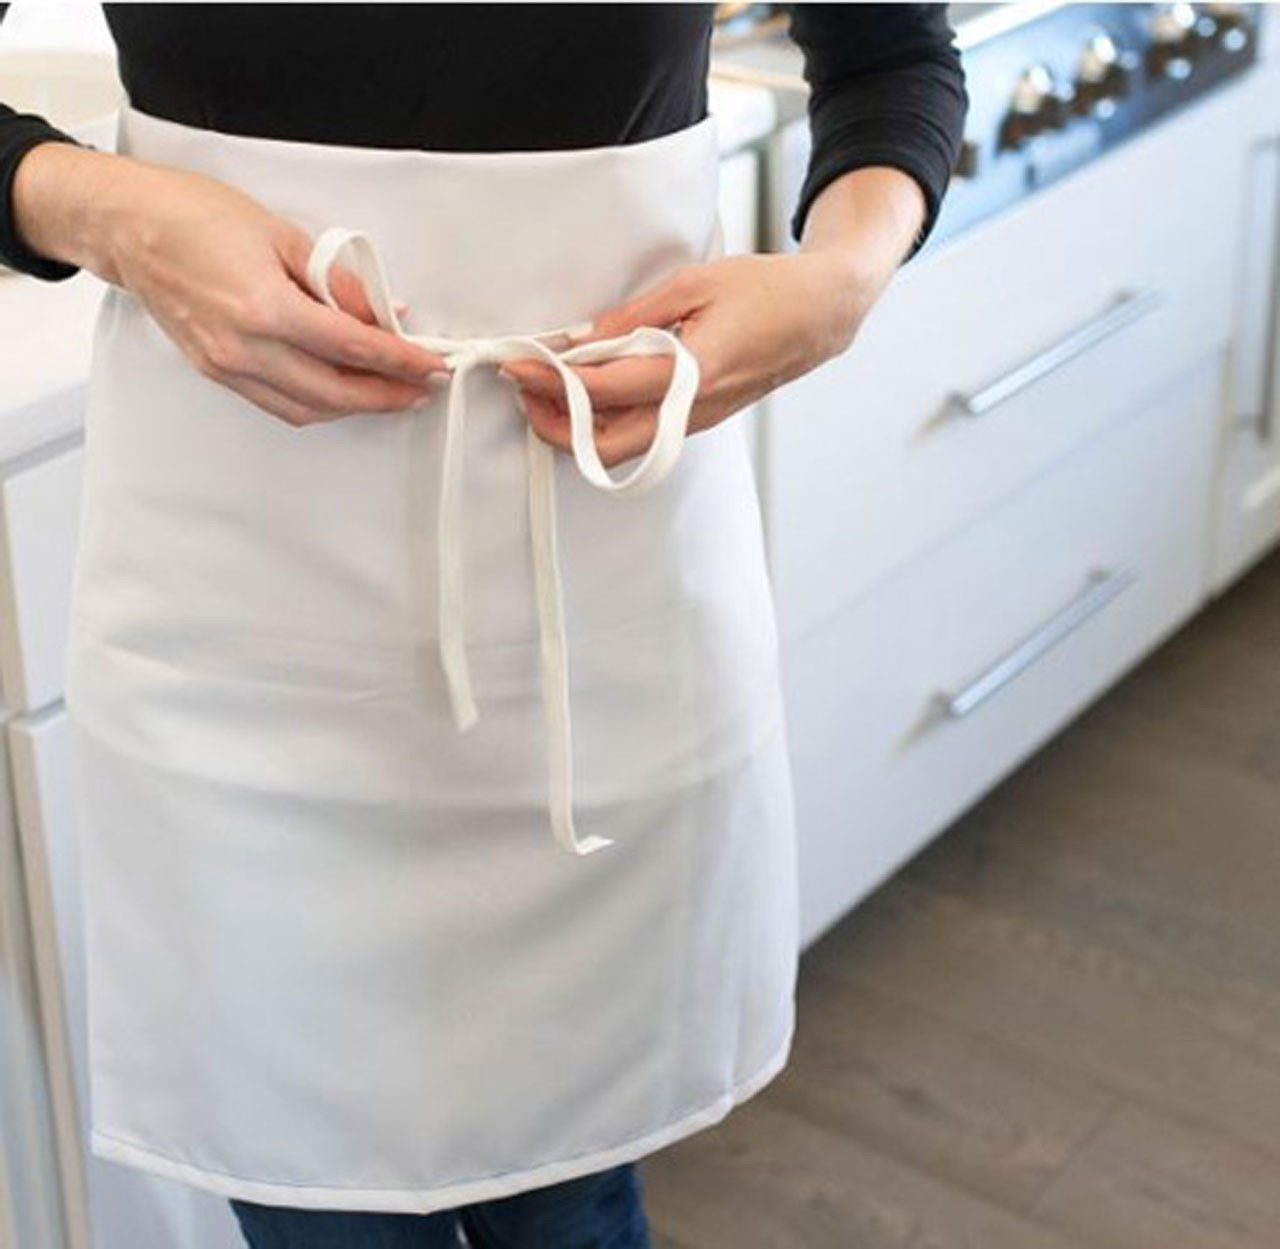 What are the uses of a 4 way apron before I purchase it?